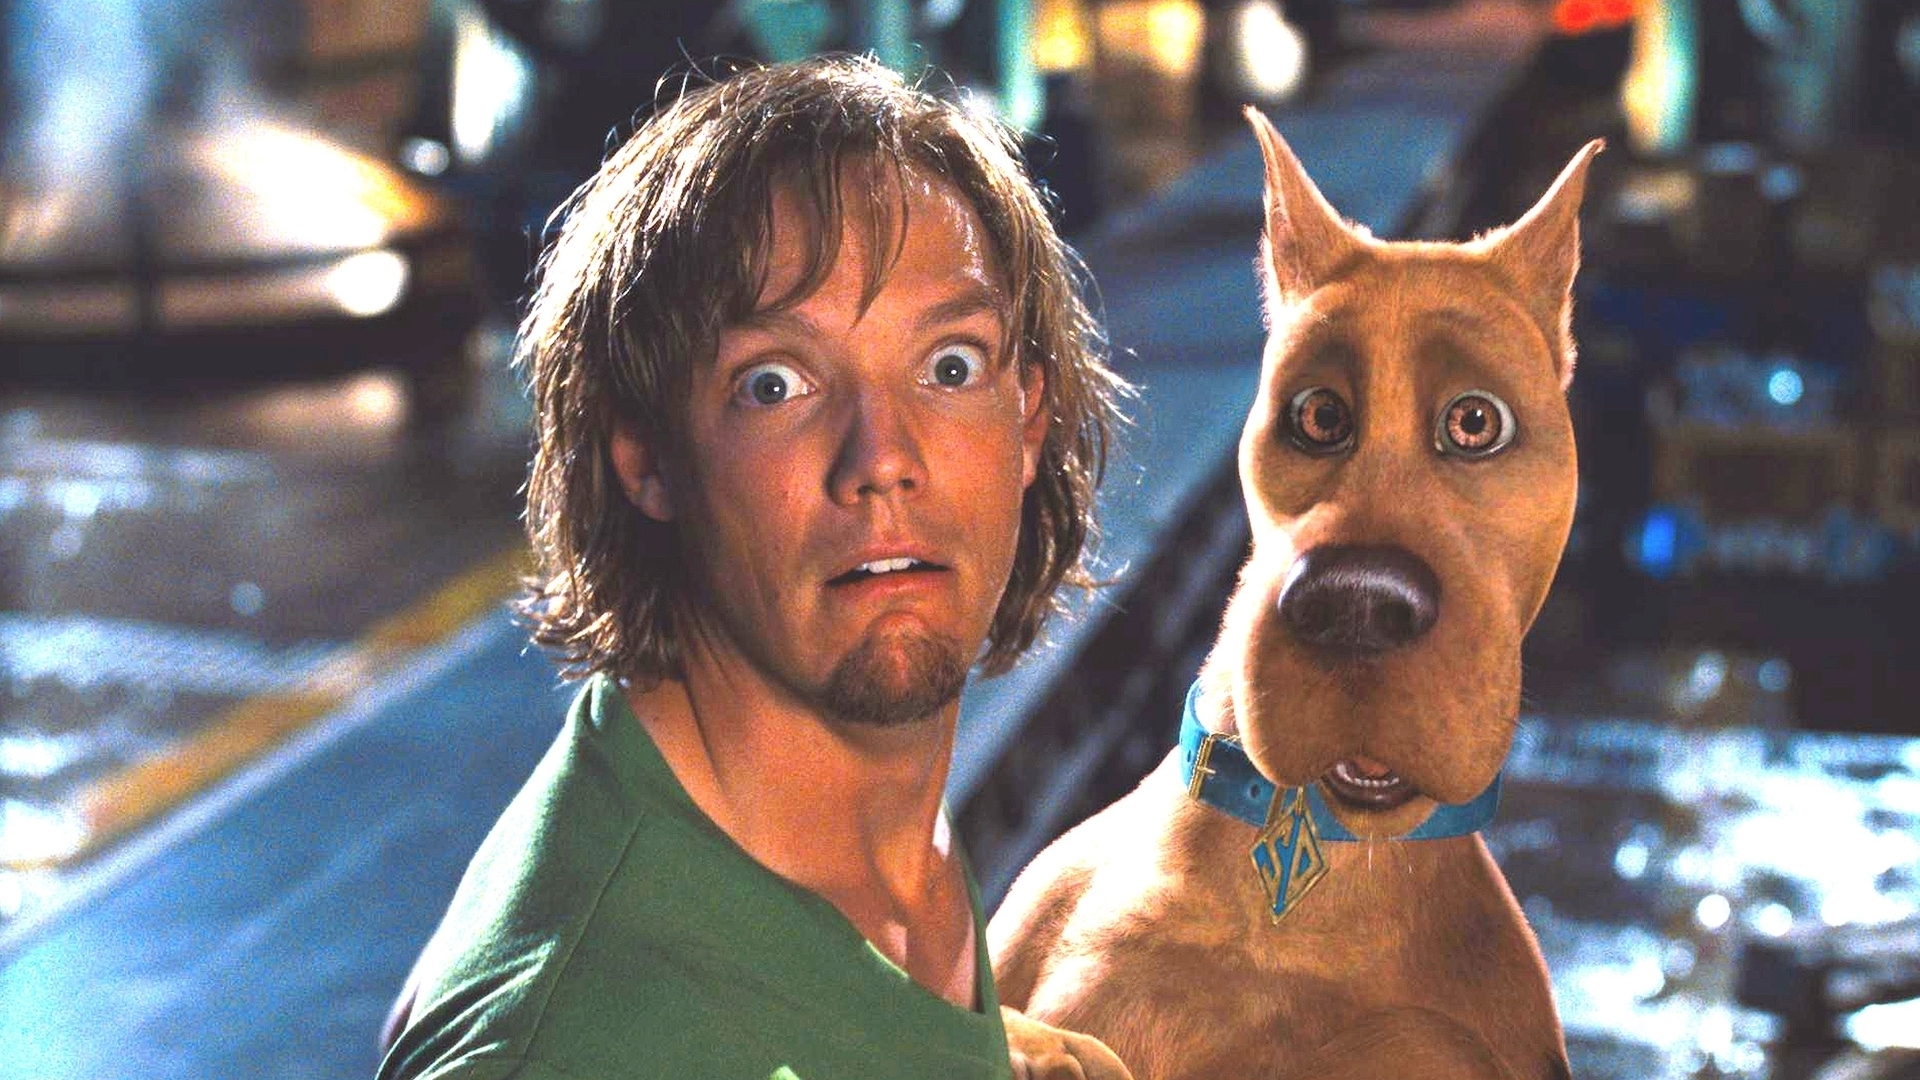 <p>To be honest, seeing a computer-generated Scooby-Doo in a live-action film kind of weirded us out at first, but once we settled in, 2002’s “Scooby-Doo” ended up being a well-executed movie. Sure, it was childish, absurd and critics tore it apart, but audiences shouldn’t expect anything less (or more) considering the source material. On the plus side, in addition to sneaking some subtle stoner humor into this kid-centric comedy, “Scooby-Doo” was perfectly cast, with Freddie Prinze Jr. as Fred, Sarah Michelle Gellar as Daphne, Linda Cardellini as Velma and Matthew Lillard as Shaggy. </p>